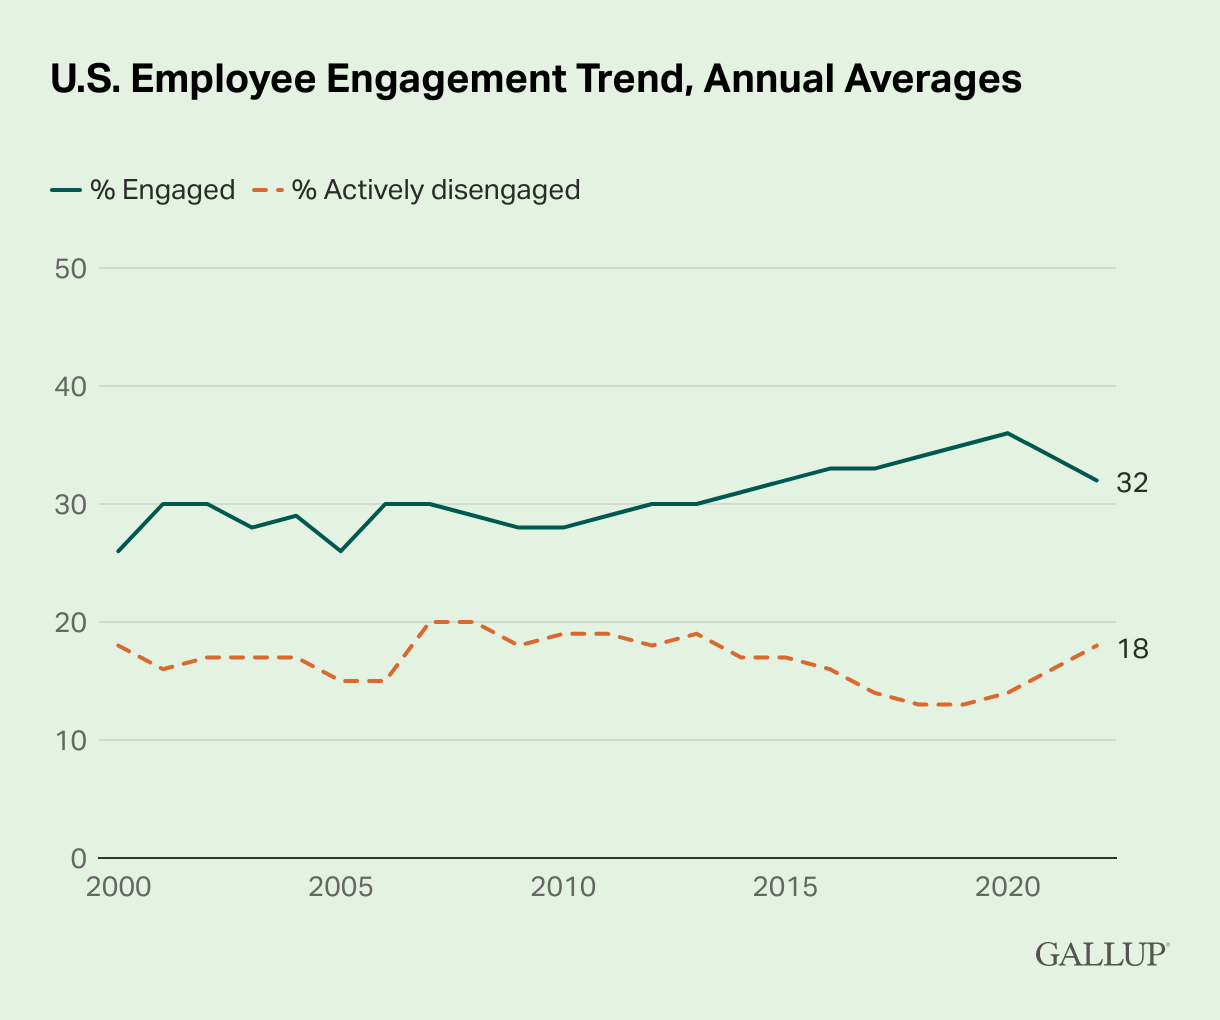 Employee Engagement - U.S. Annual Averages